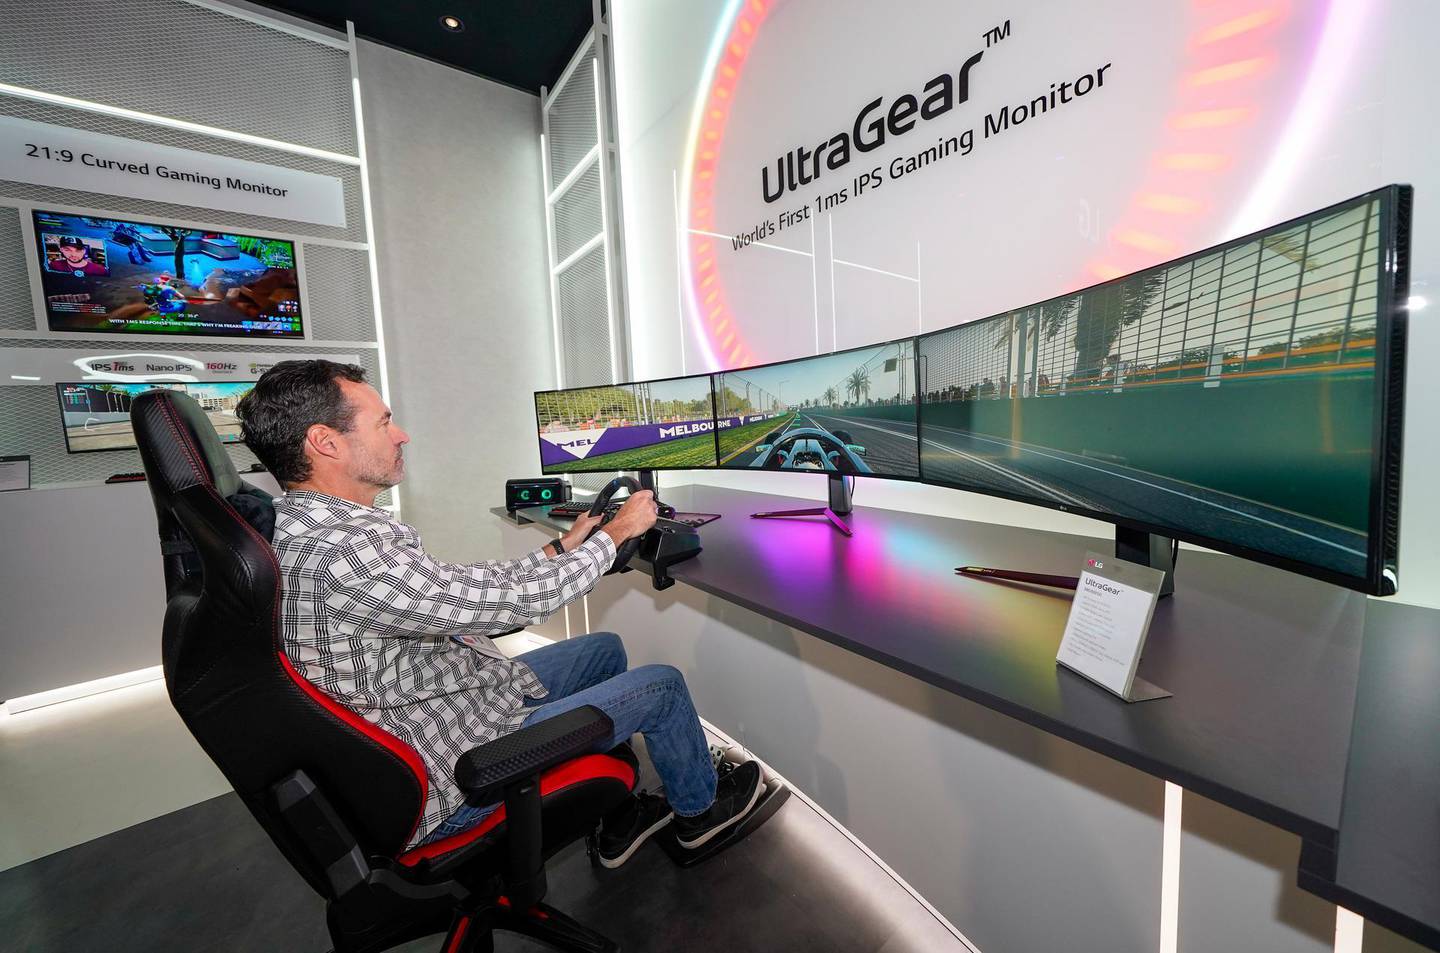 IMAGE DISTRIBUTED FOR LG ELECTRONICS - The World's First 1ms IPS Gaming Monitor at the LG Electronics booth during CES 2020 on Wednesday, Jan. 8, 2020 in Las Vegas. (Jack Dempsey/AP Images for LG Electronics)